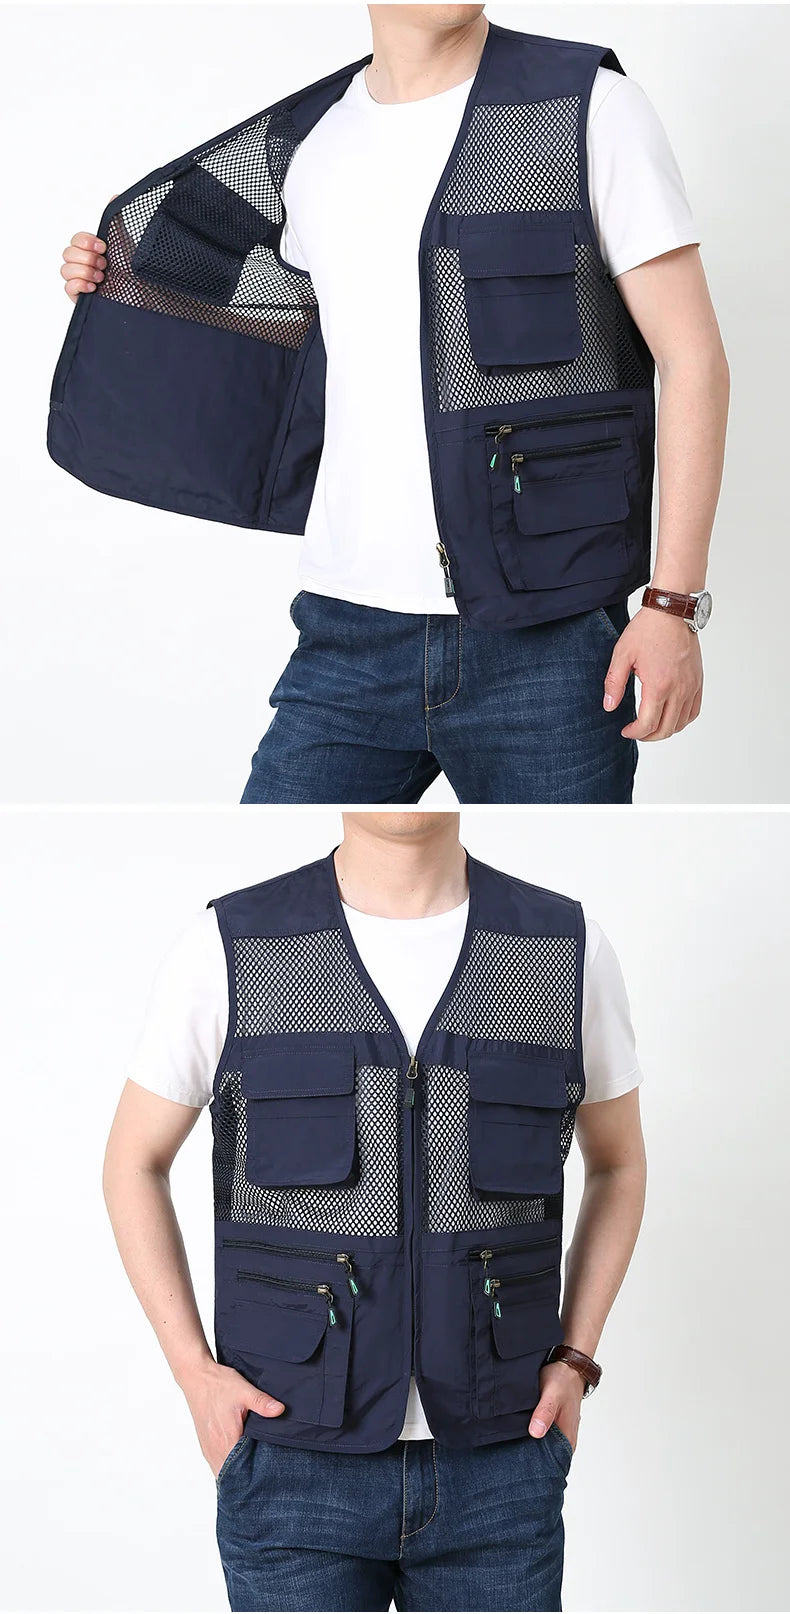 Summer Thin Mesh Vest Outdoor Jackets Sleeveless Vest Casual Tactical Work Wear Camping Vests